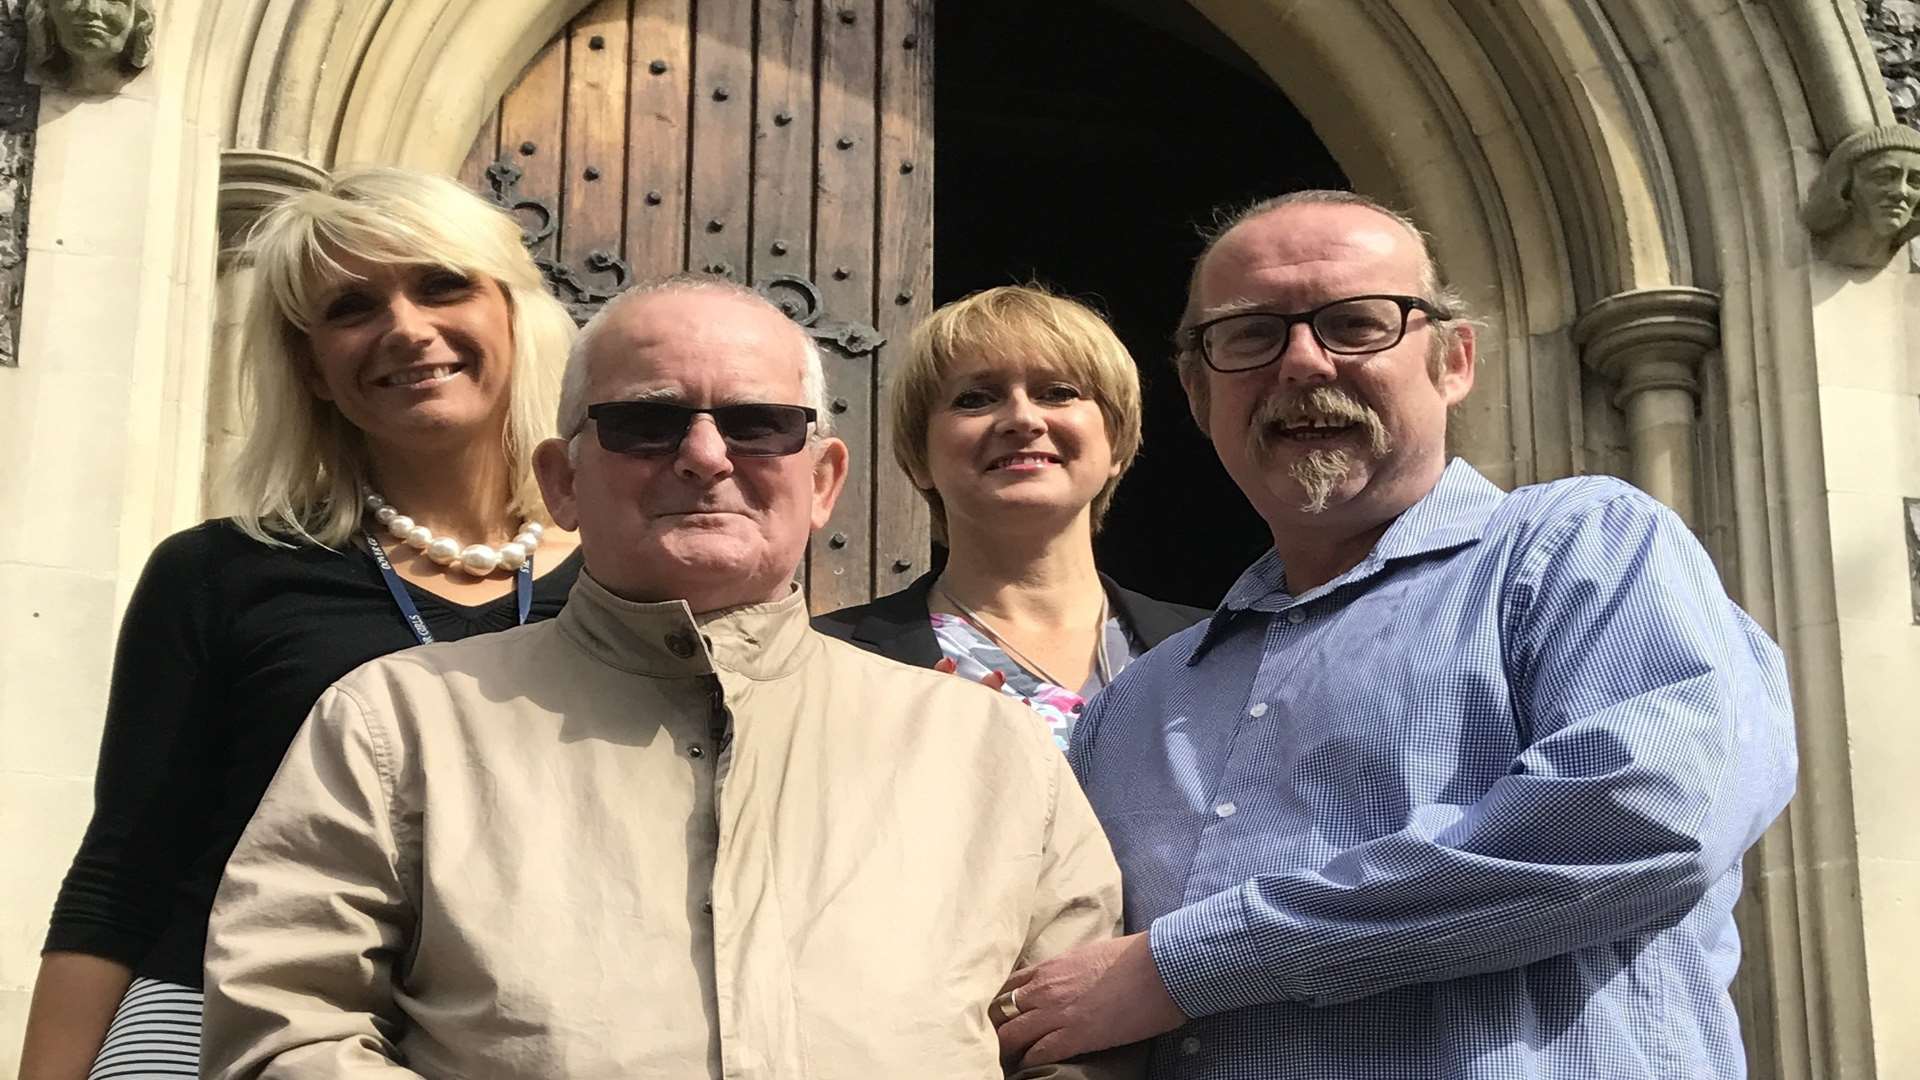 From left Linda's daughter, Emma Lyons, Ronnie's husband Christopher, Linda's daughter Sara Atkinson and Ronnie's son Shaun. Picture courtesy of JIGintheBOX Entertainment.